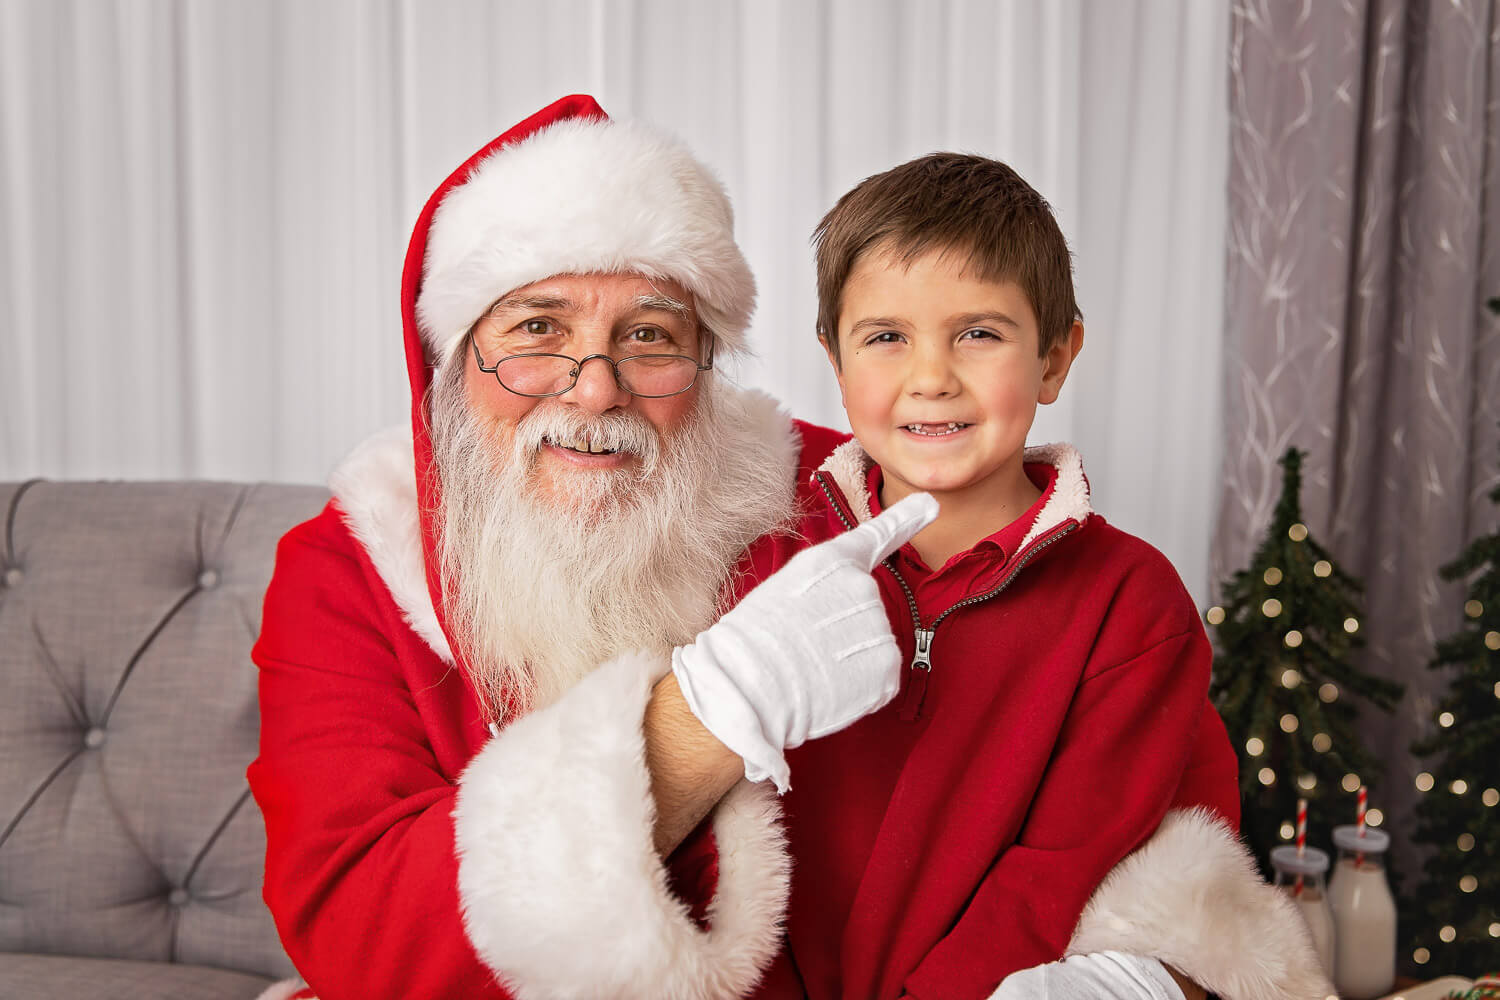 Closeup of Santa pointing to the missing front teeth of a young boy